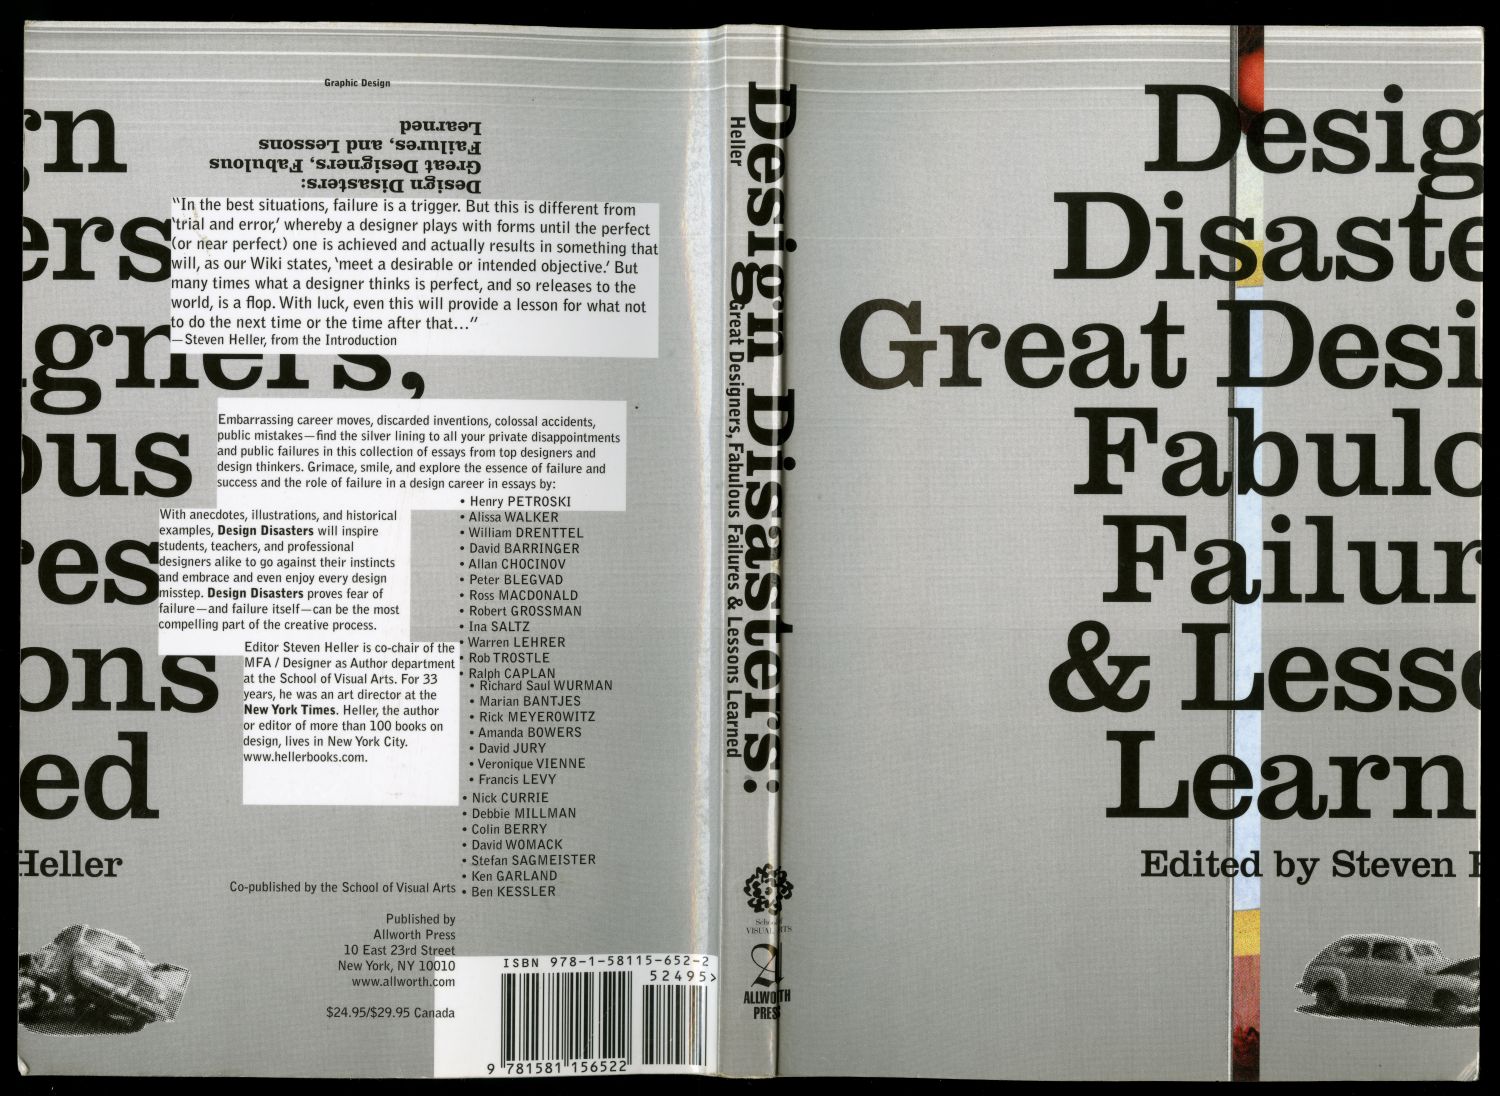 『Design Disasters: Great Designers Fabulous Failures & Lessons Learned』 表紙